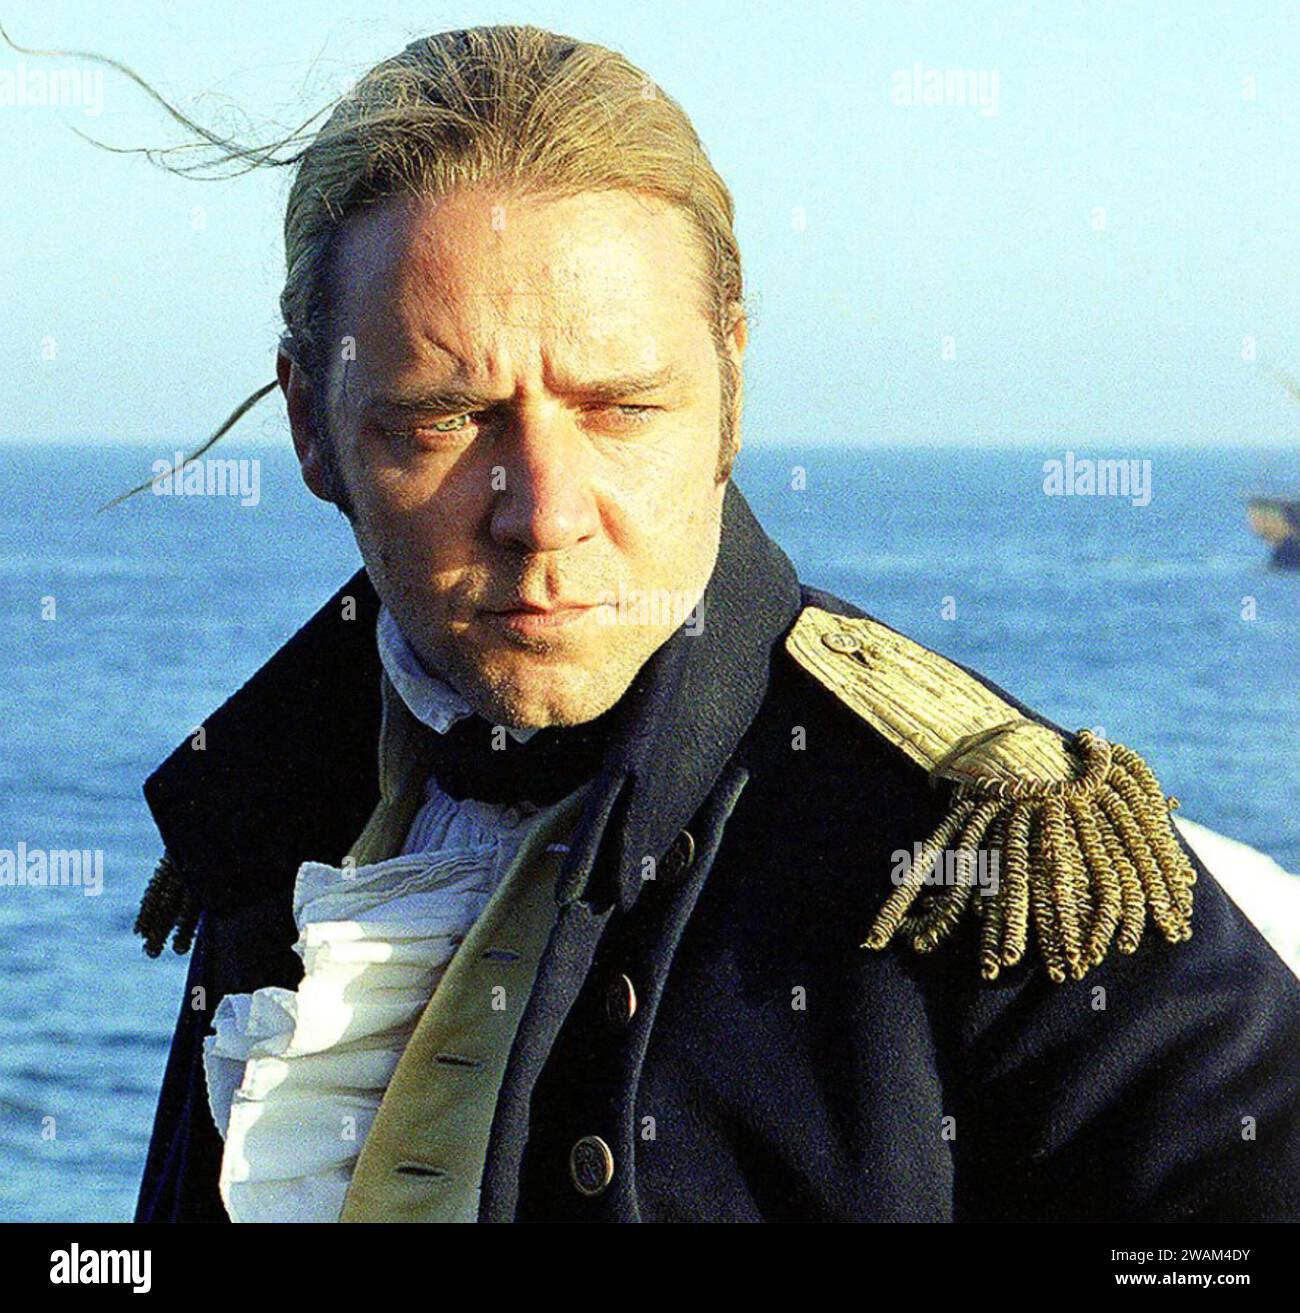 MASTER AND COMMANDER: THE FAR SIDE OF THE WORLD 2003 20th Century Fox-Film mit Russell Crowe als Captain Jack Aubrey Stockfoto